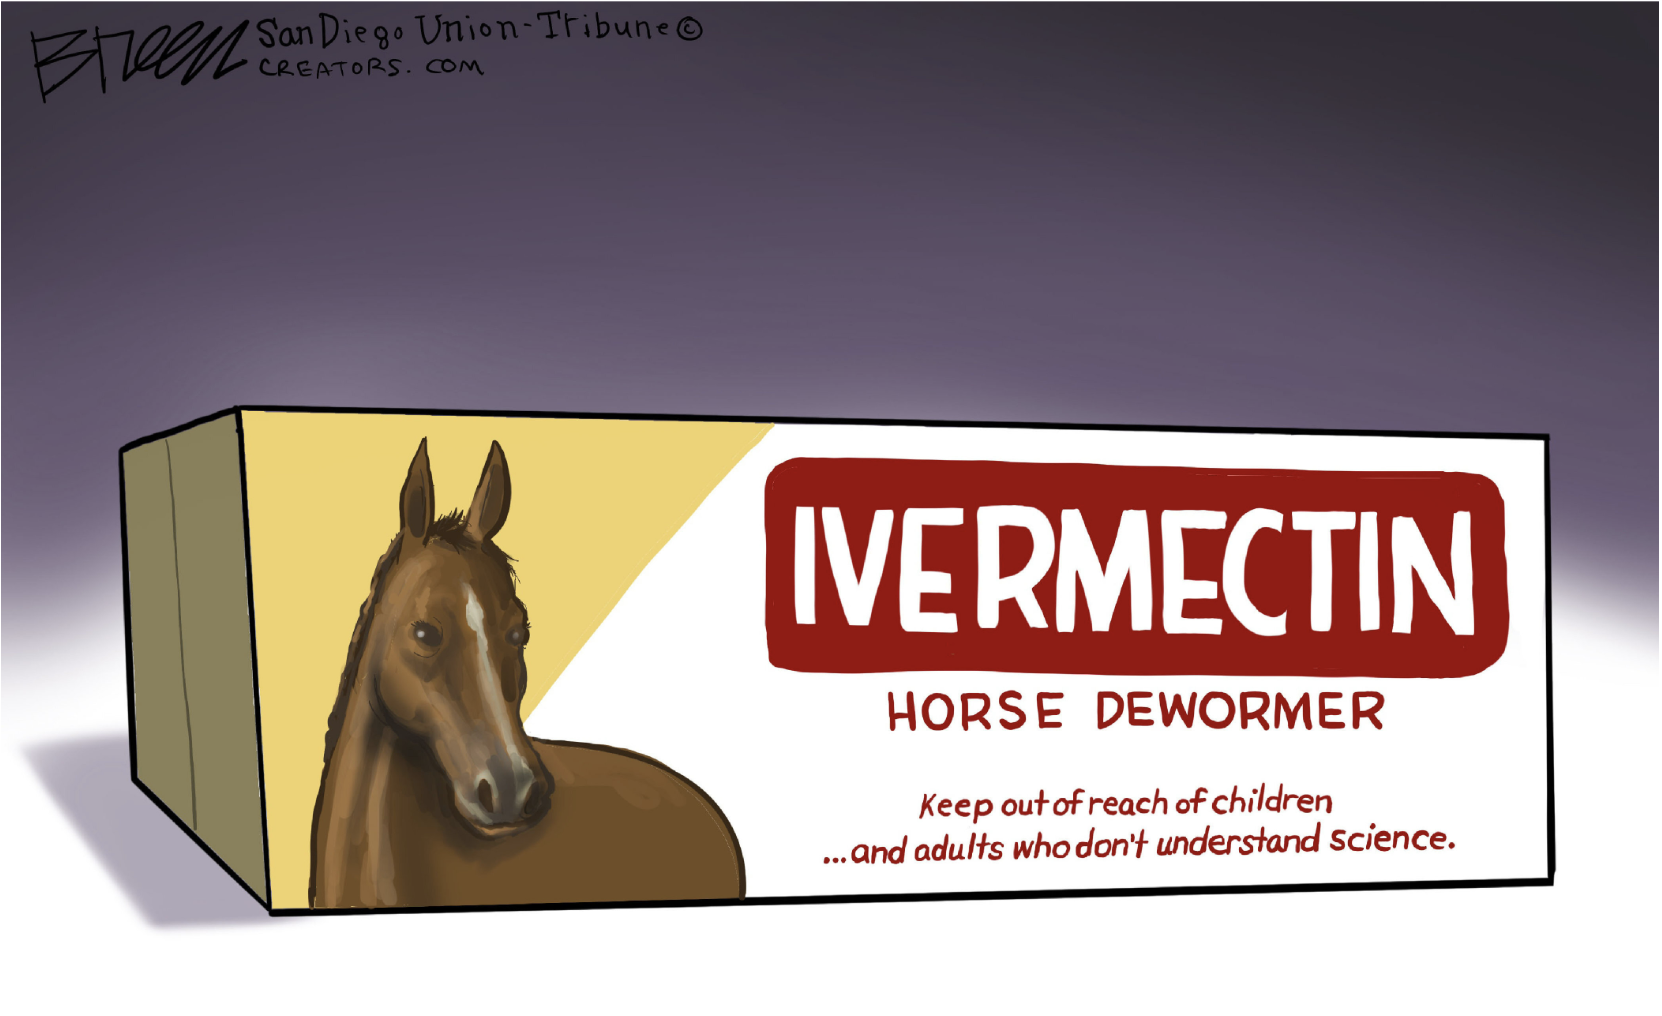 COVID 19 Horse Dewormer to Help Prevent? Here are the Reasons Why People Are Taking It!